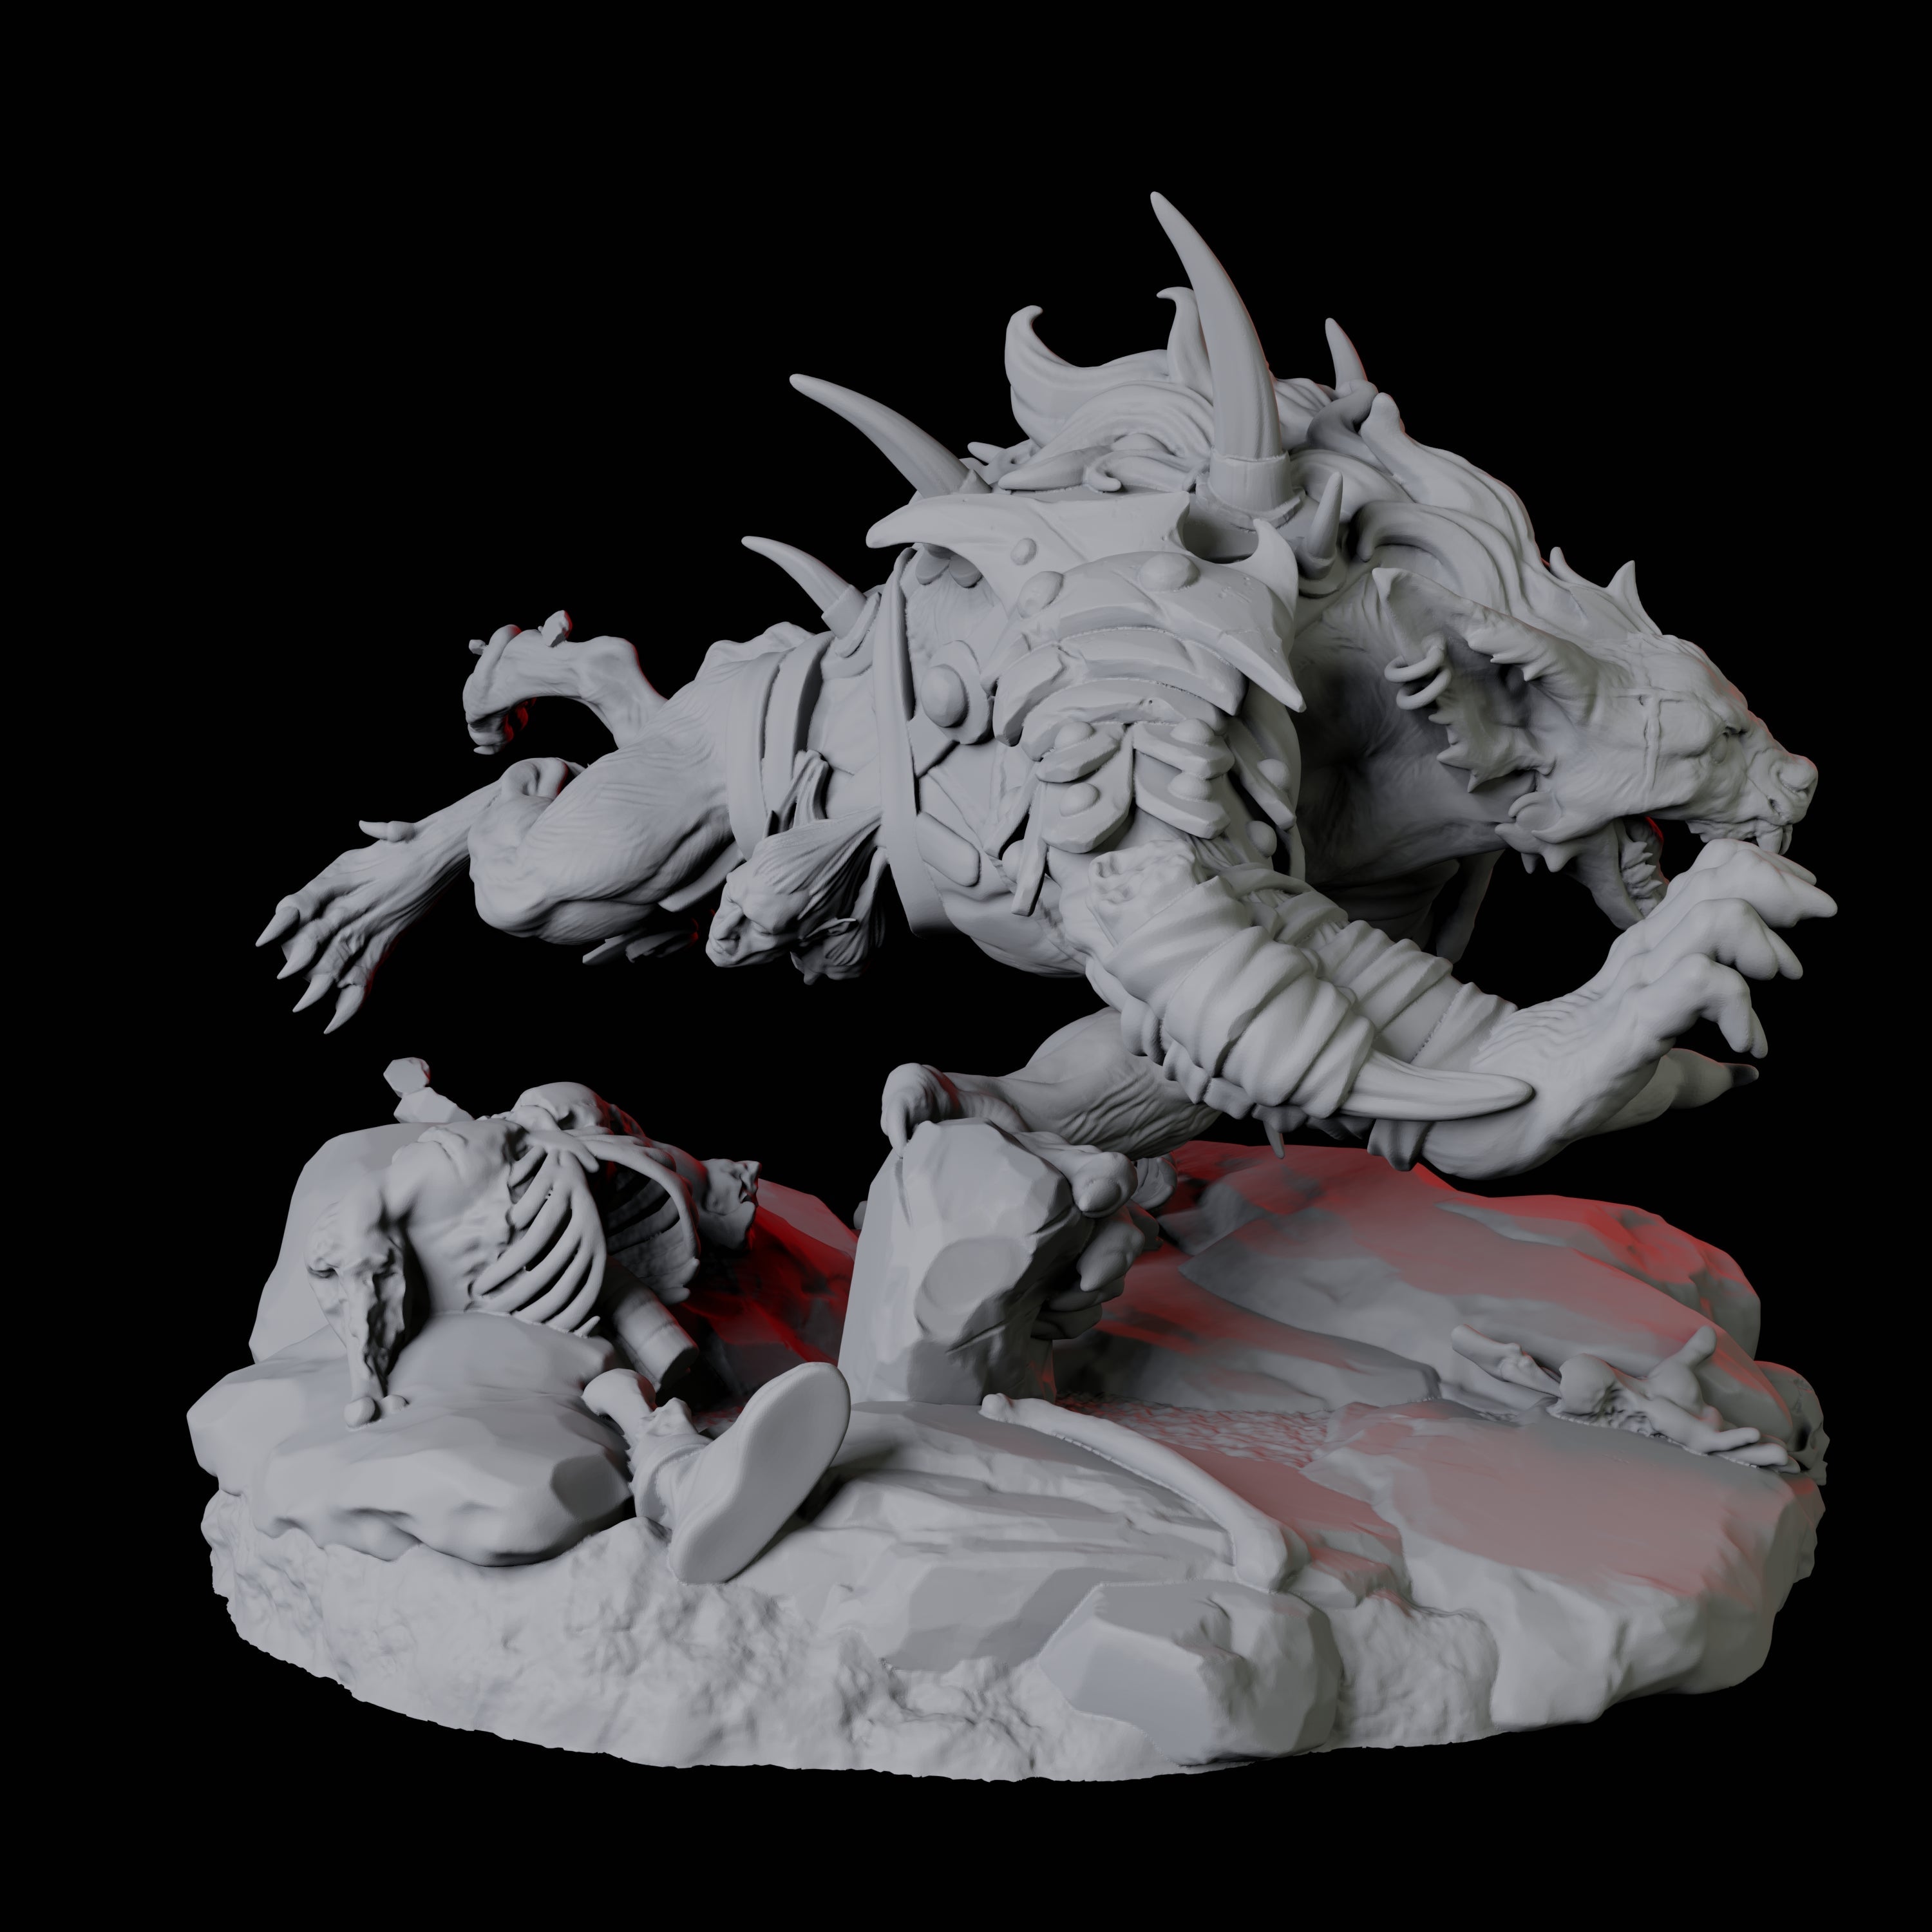 Gnoll Tracker D Miniature for Dungeons and Dragons, Pathfinder or other TTRPGs